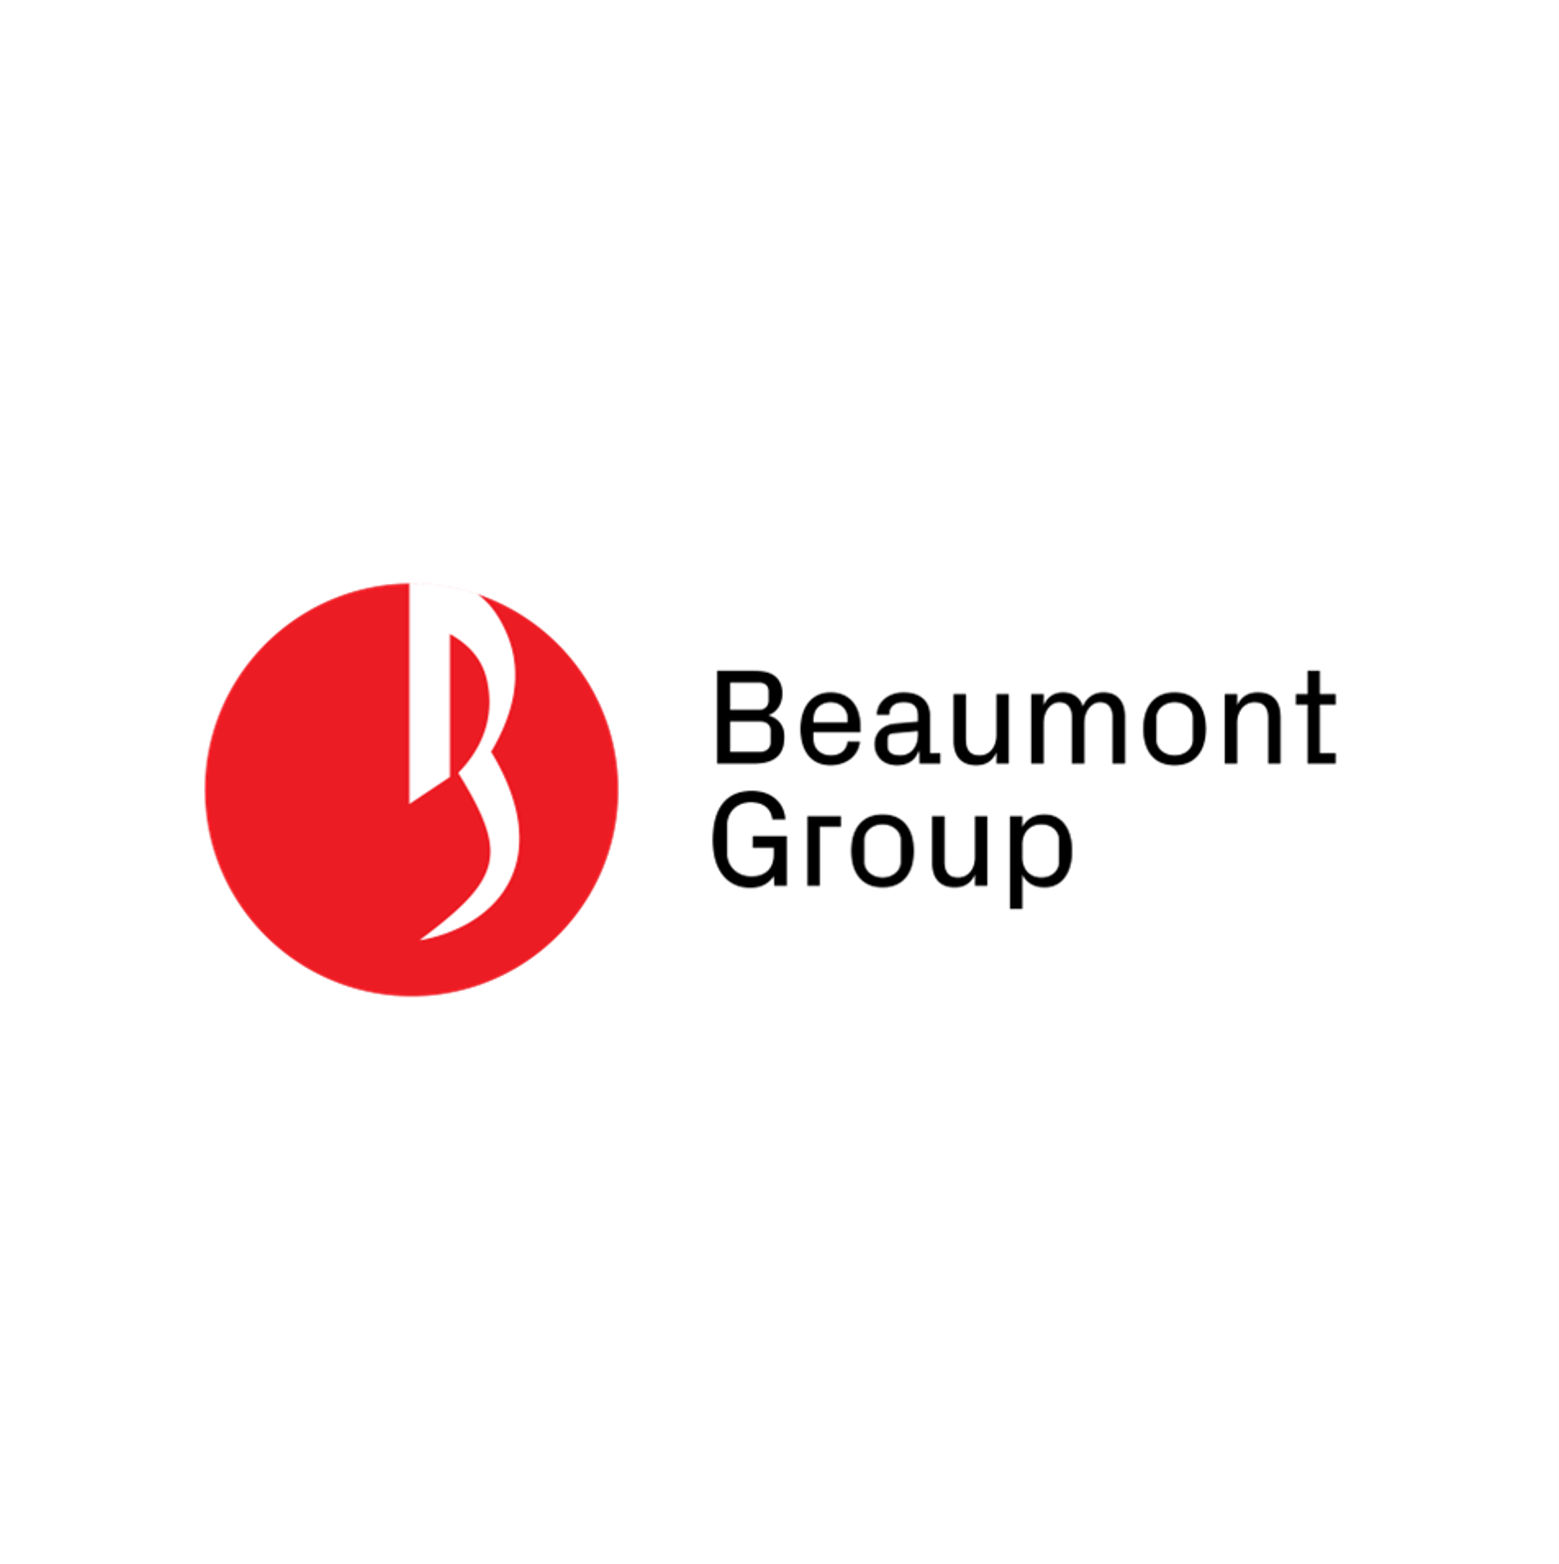 BEAUMONT GROUP